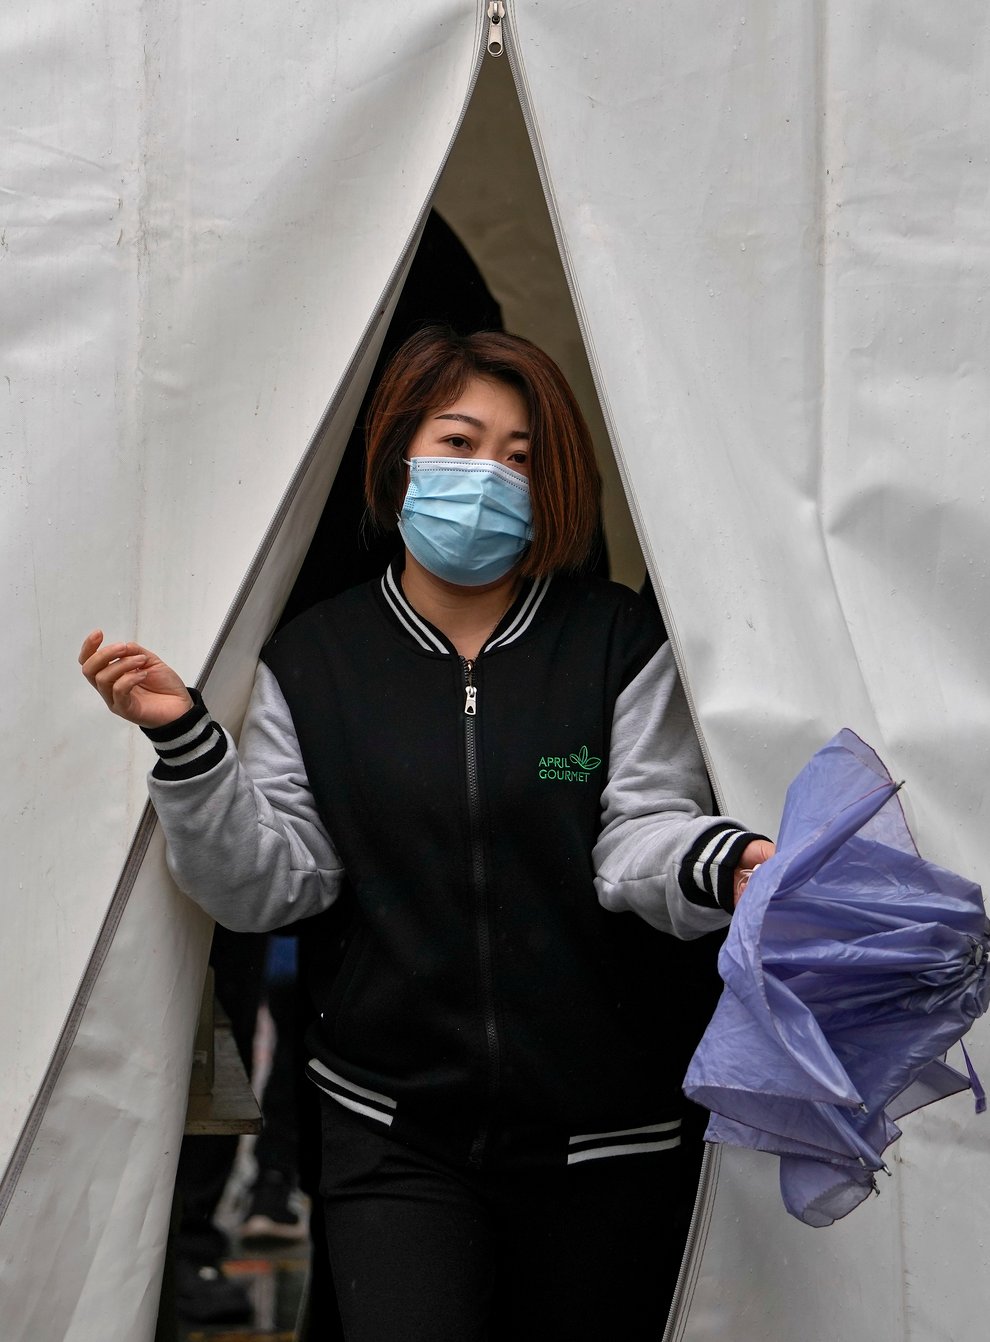 A woman wearing a face mask to help protect from the coronavirus walks out from a tent after getting a Covid-19 test (AP)